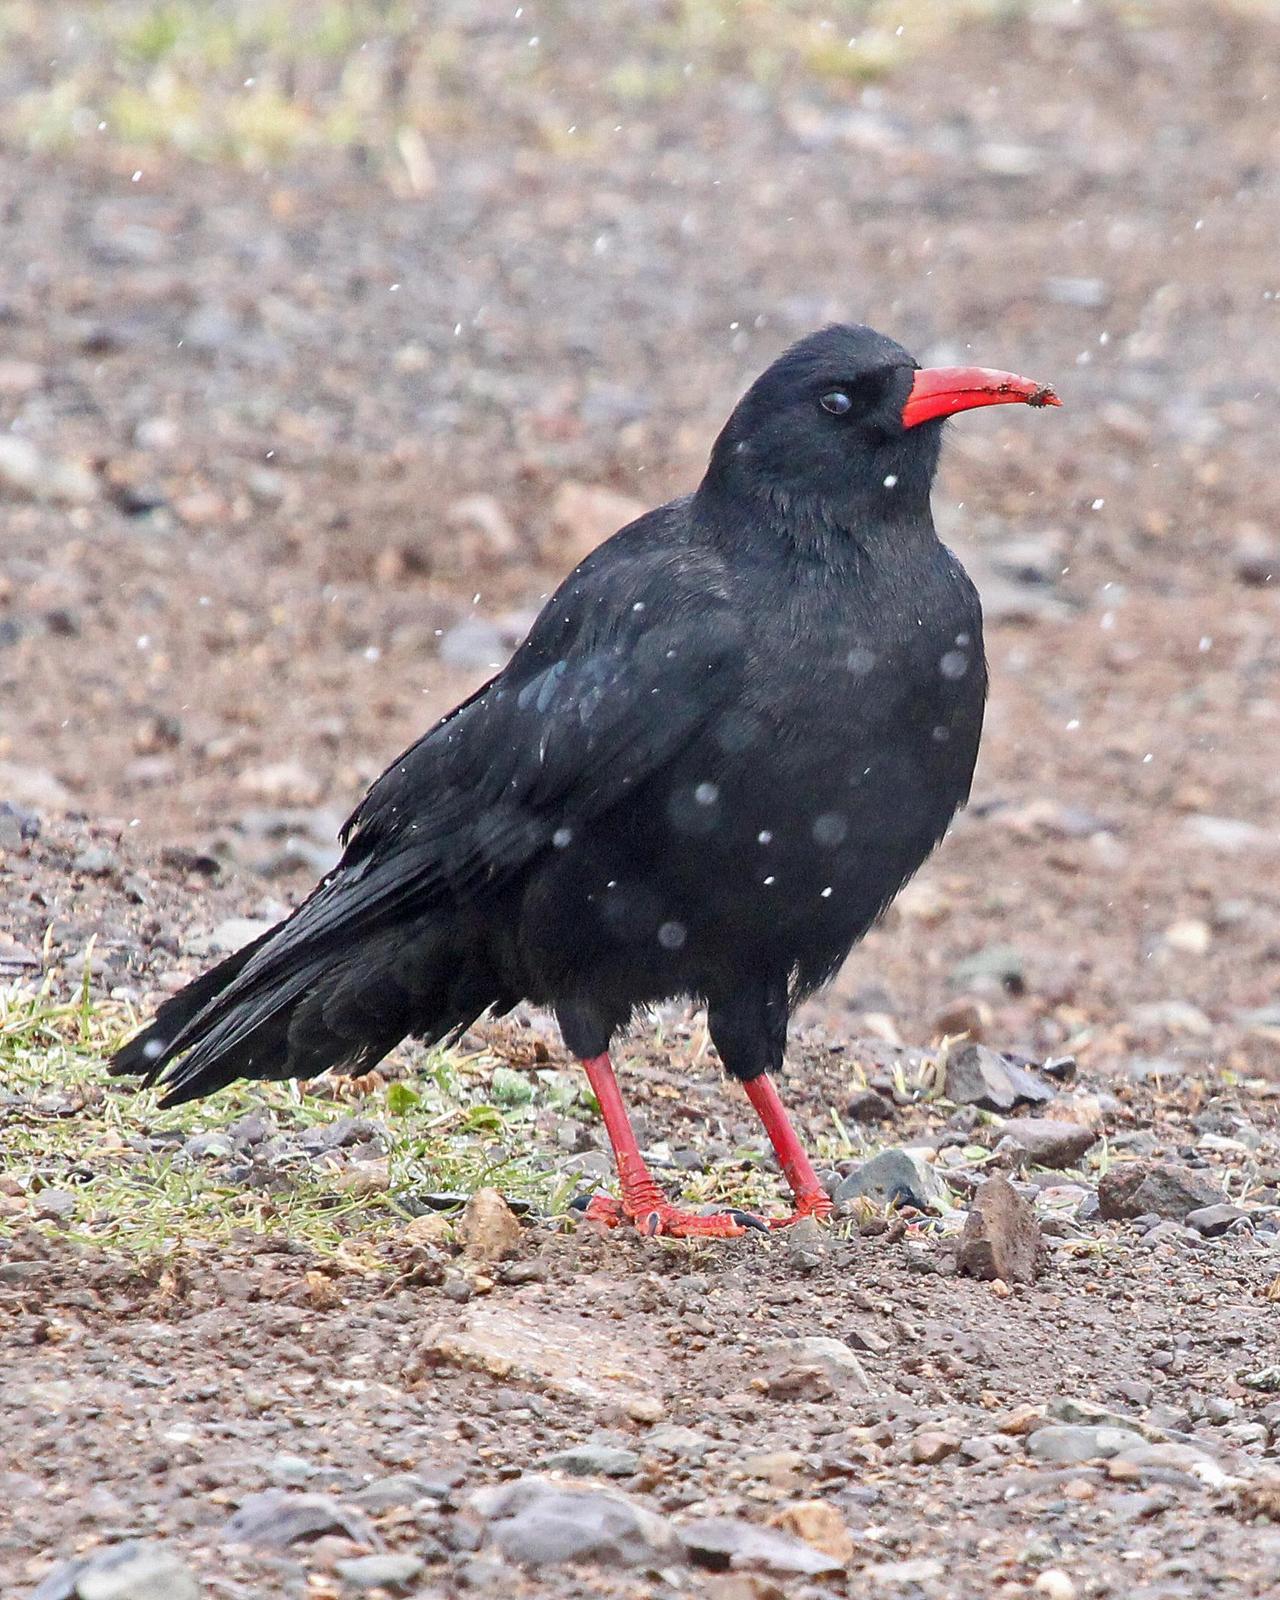 Red-billed Chough Photo by Robert Polkinghorn